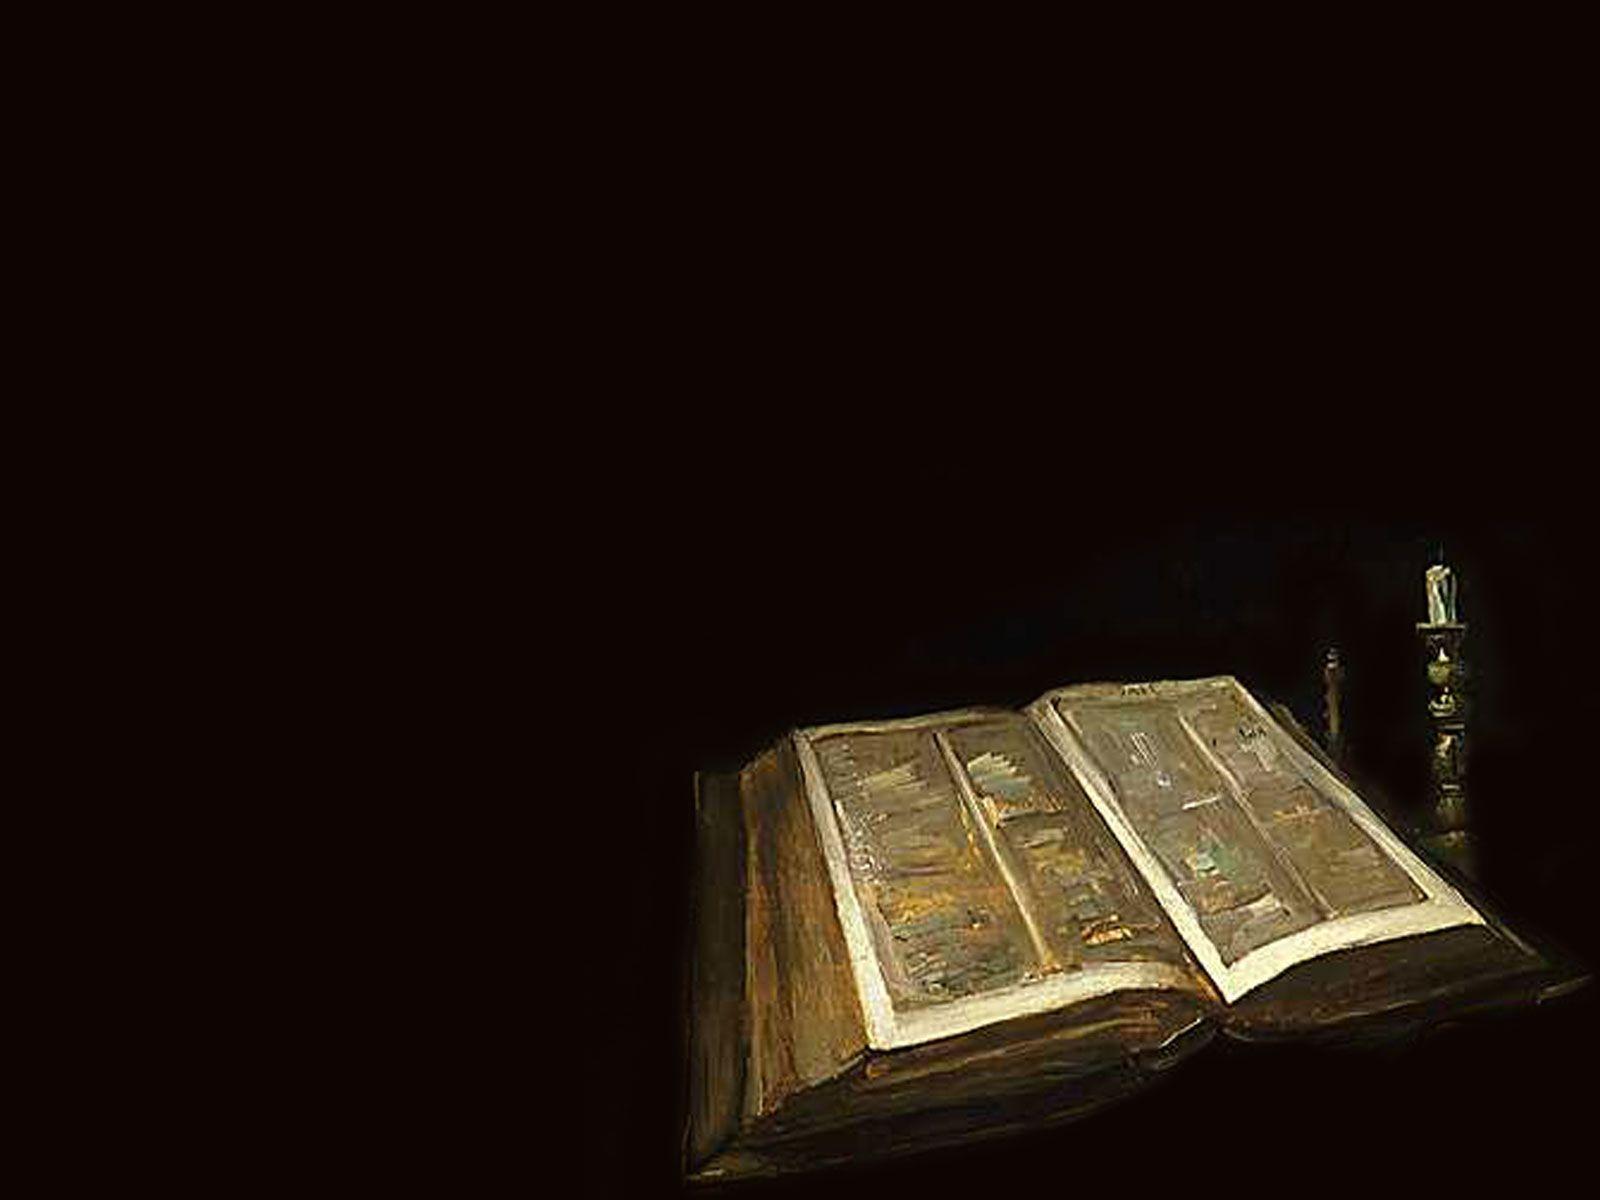 Holy bible II Wallpaper Wallpaper and Background